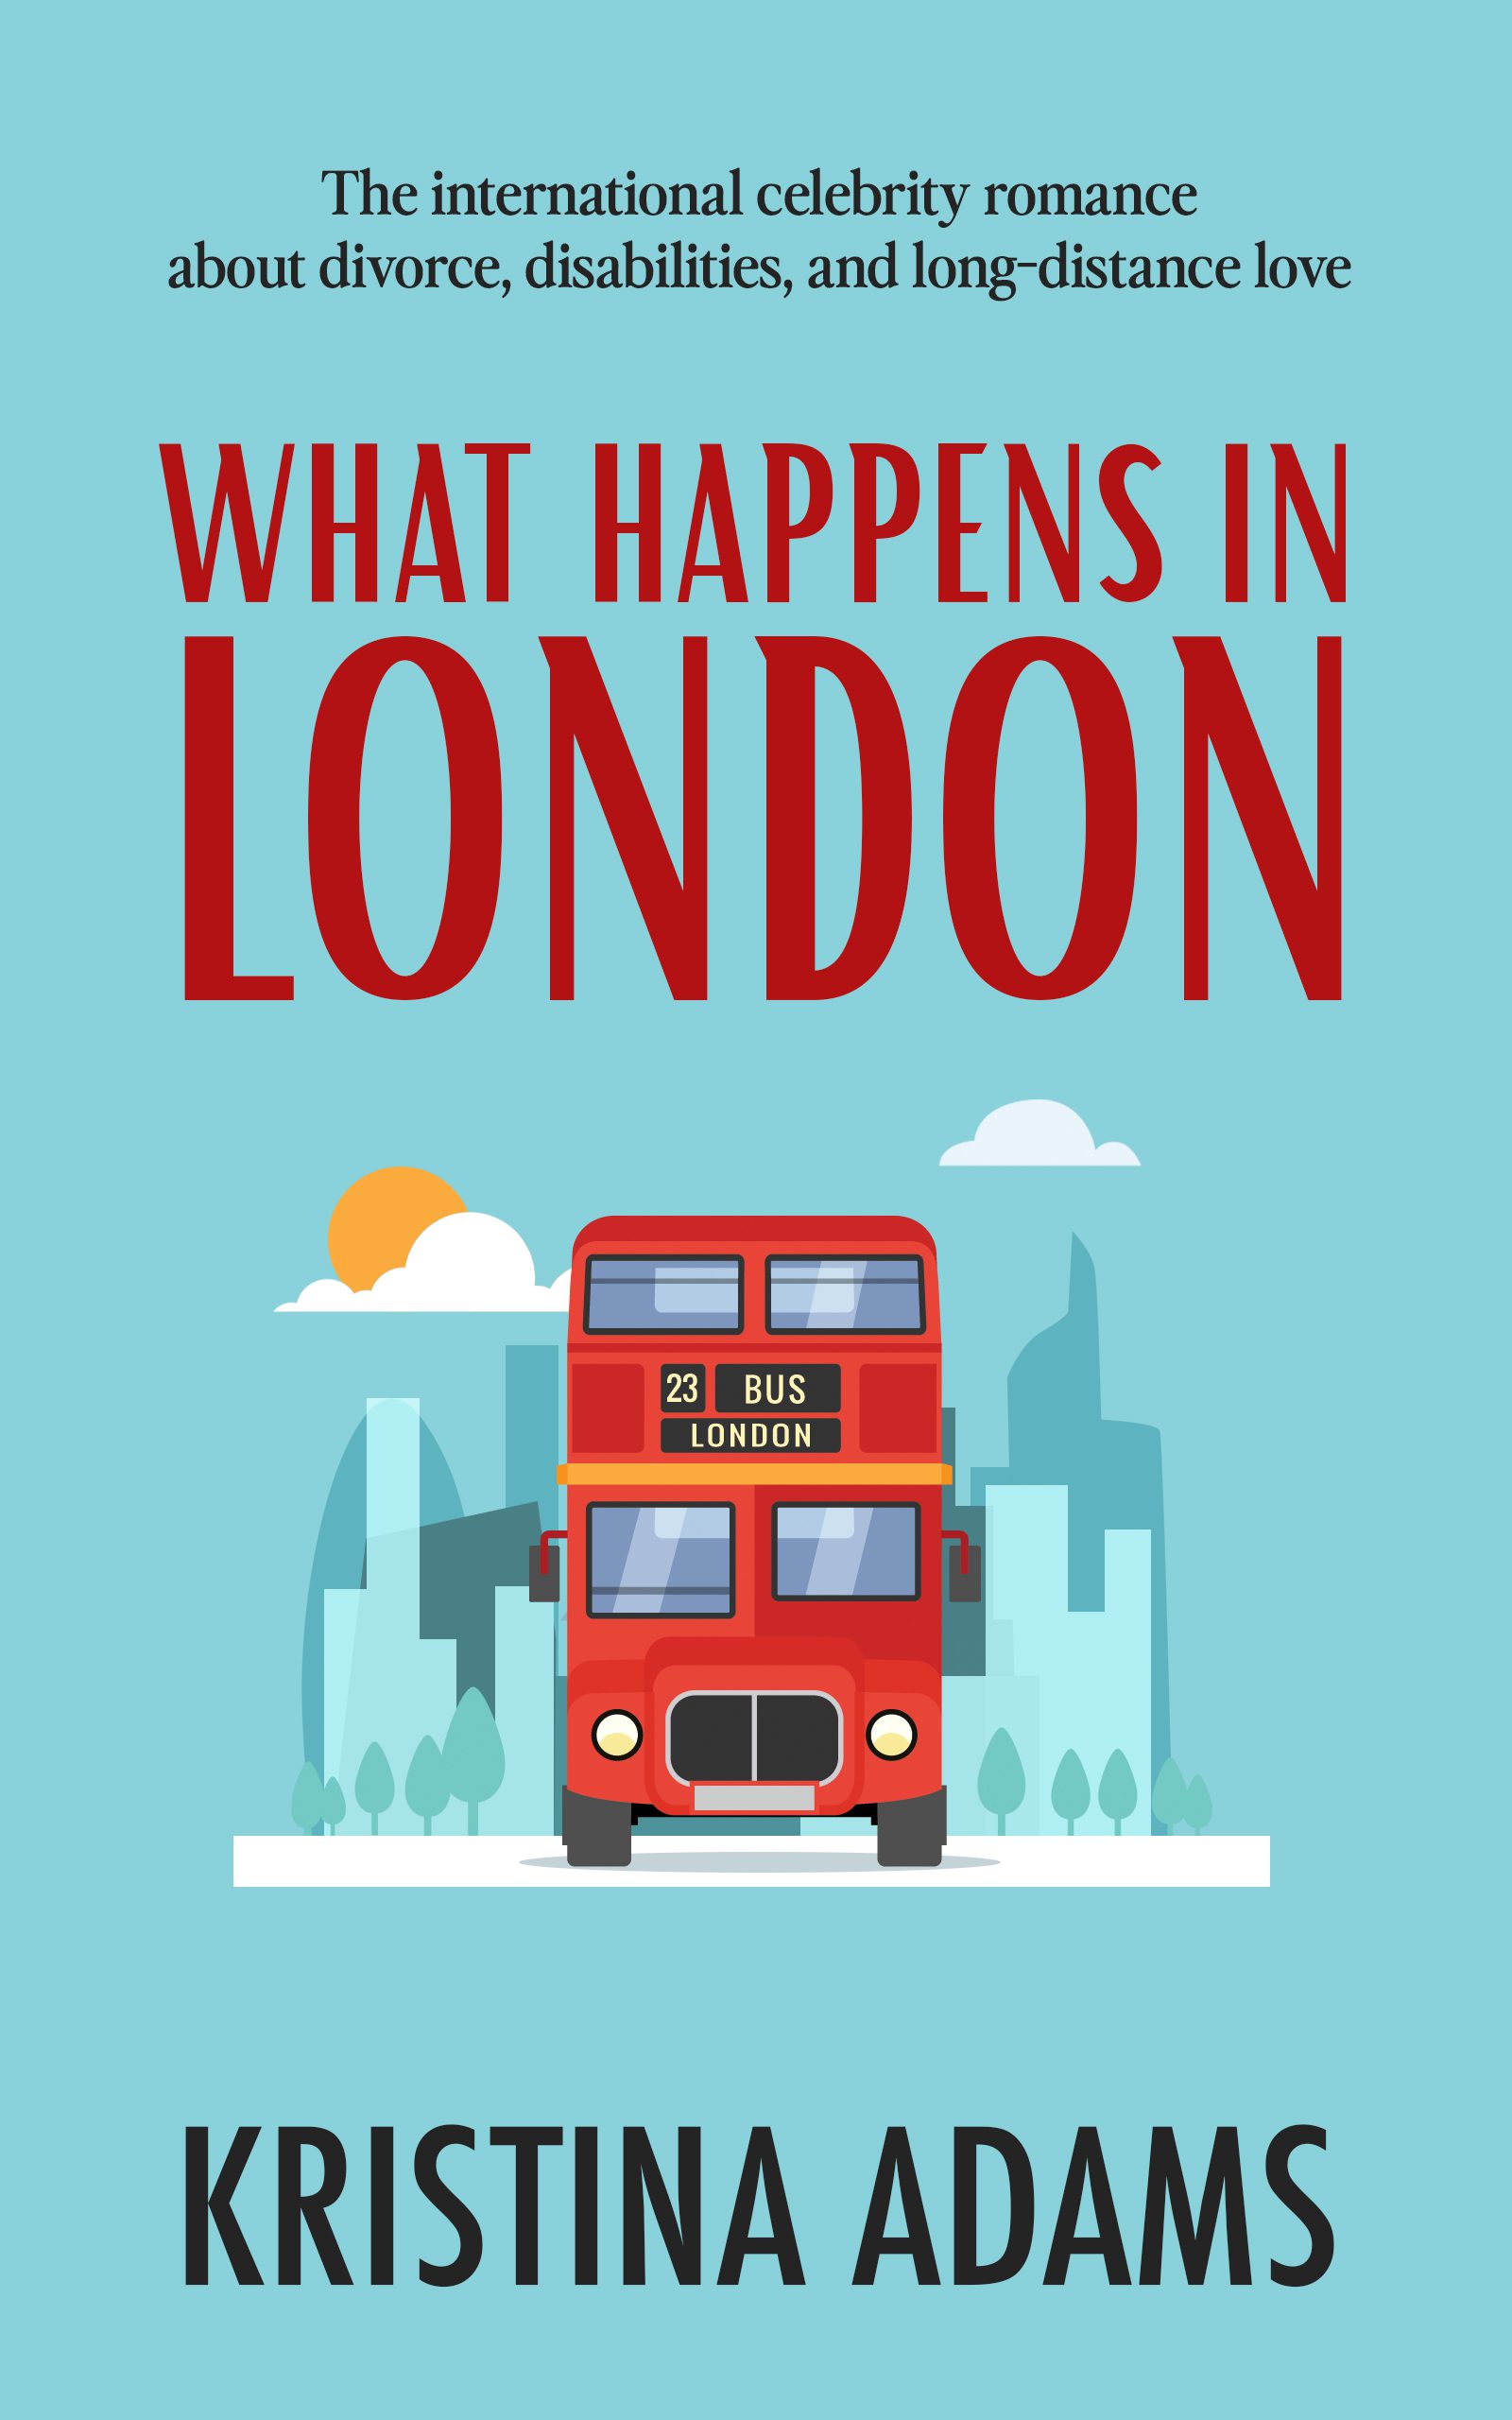 What Happens in London by Kristina Adams